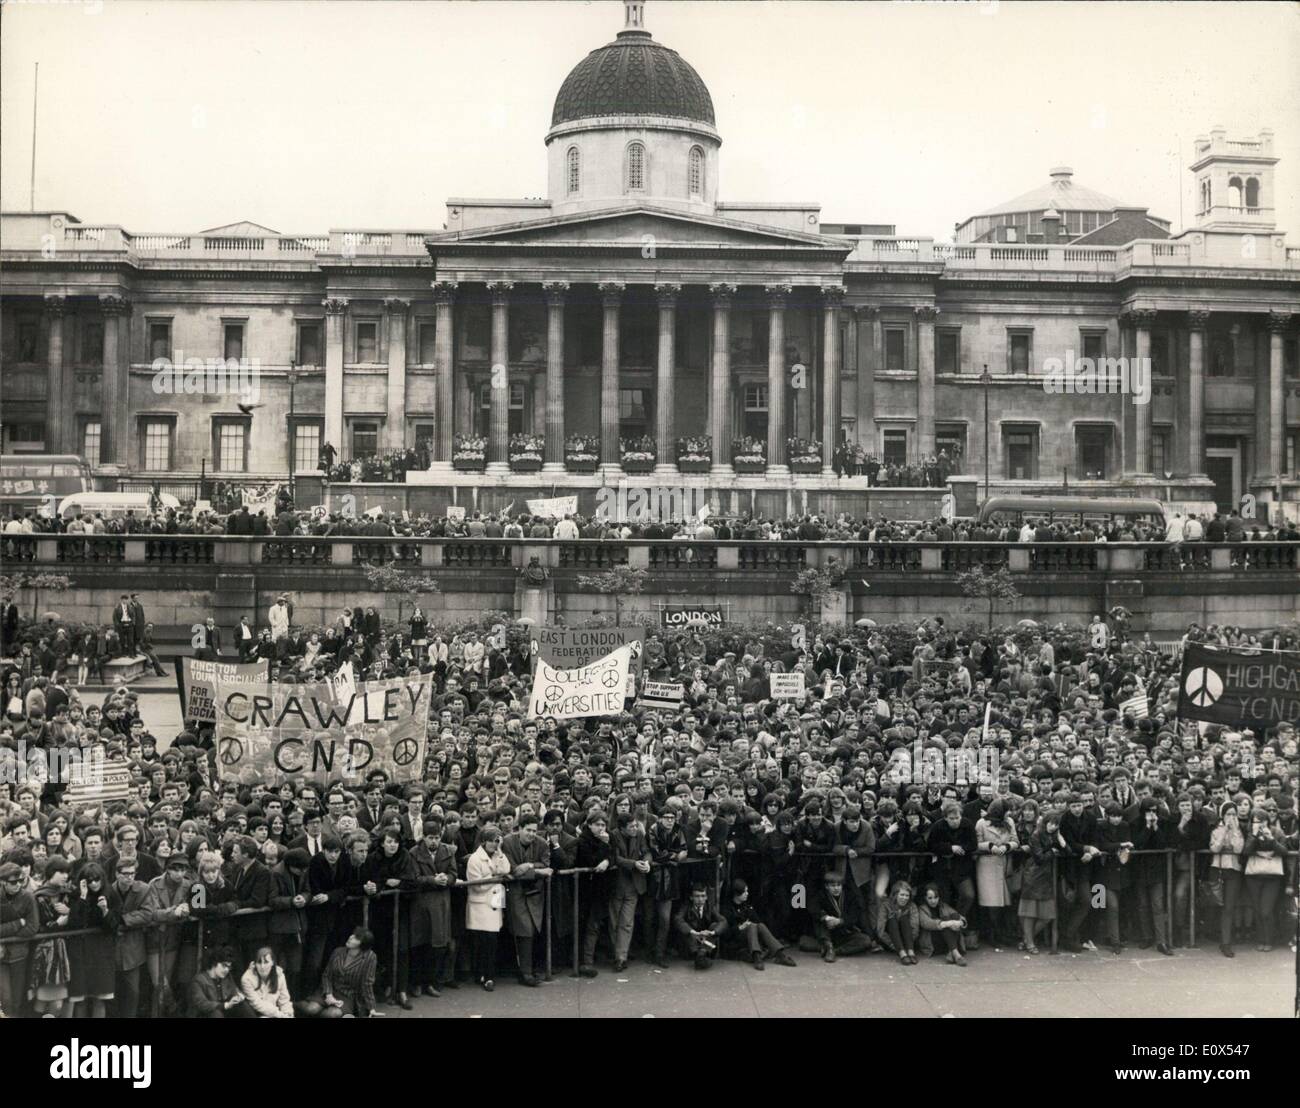 May 29, 1965 - Peace in Vietnam Meeting in Trafalgar Square: The American Folk Singer and Freedom marcher Joan Baez, Lead a march to stop the war in Vietnam the March is organised jointly by the Campaign for nuclear Disarmament and committee of 100. They Marched from Marble Arch to Trafalgar Sq to hold the Rally, after which they will go to Downing St to give a massage to the Prime Minister Mr Wilson. Picture Shows: A general View during the rally in Trafalgar Square this afternoon. Stock Photo